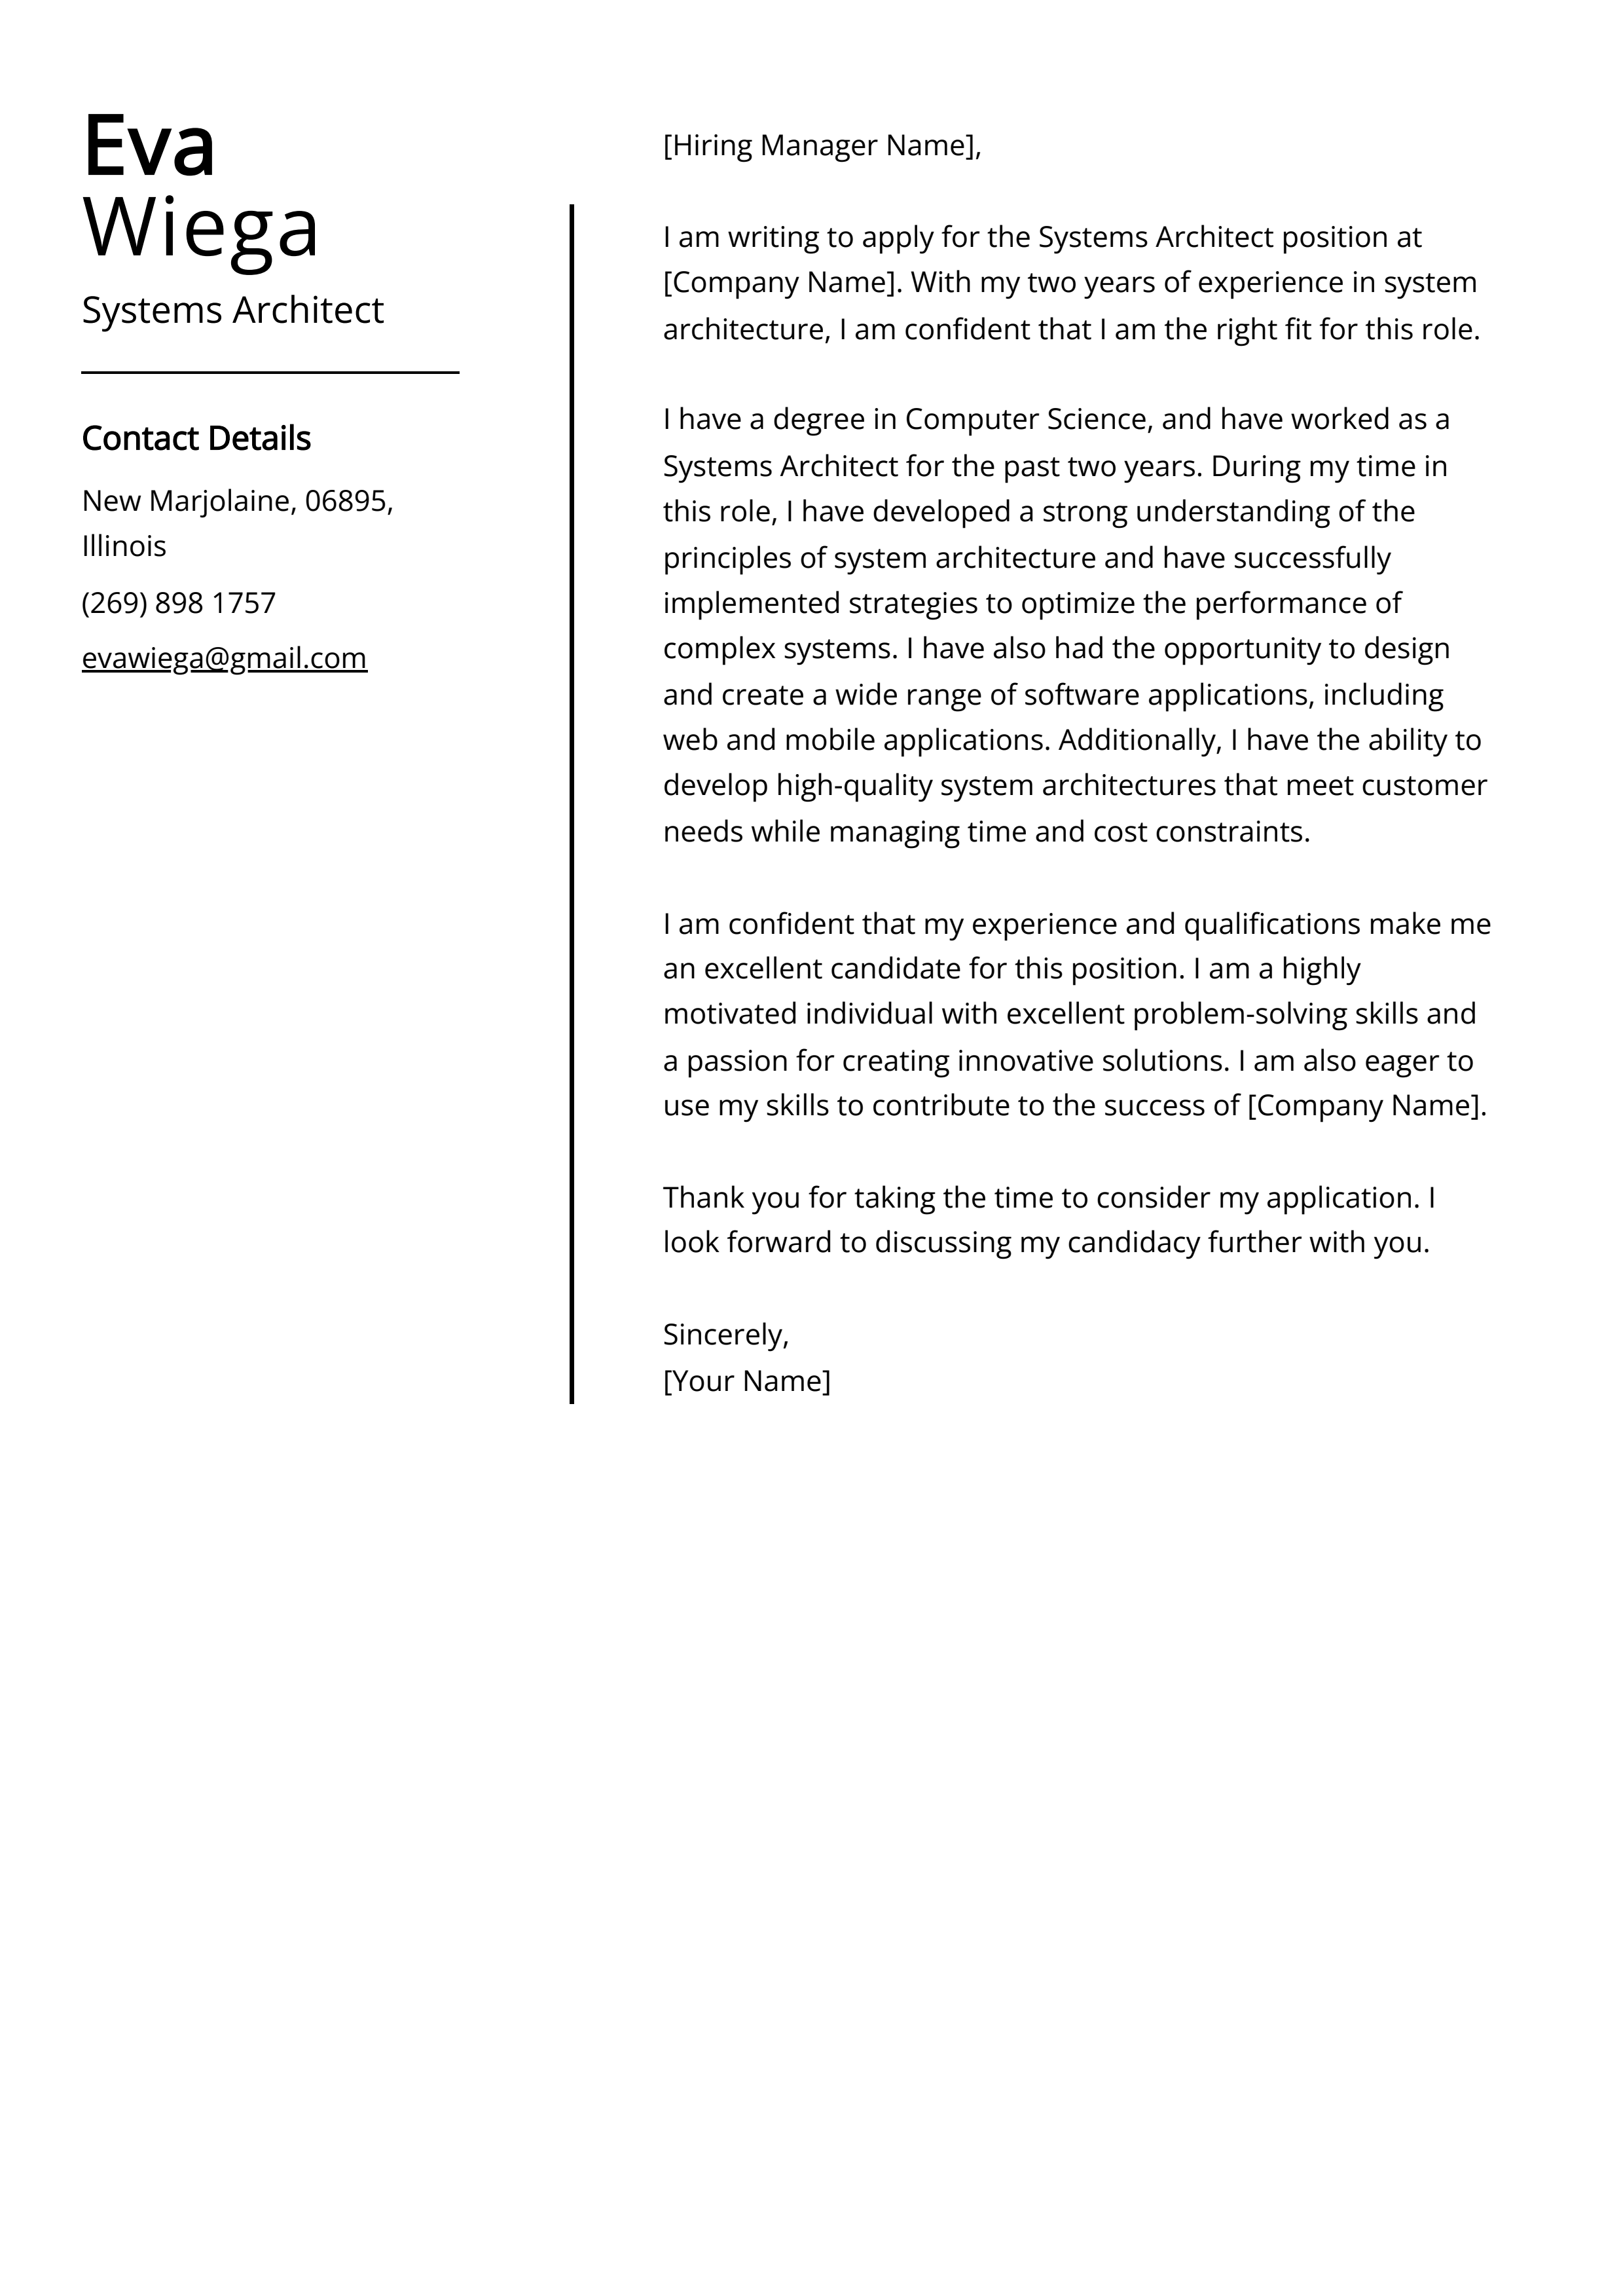 Systems Architect Cover Letter Example